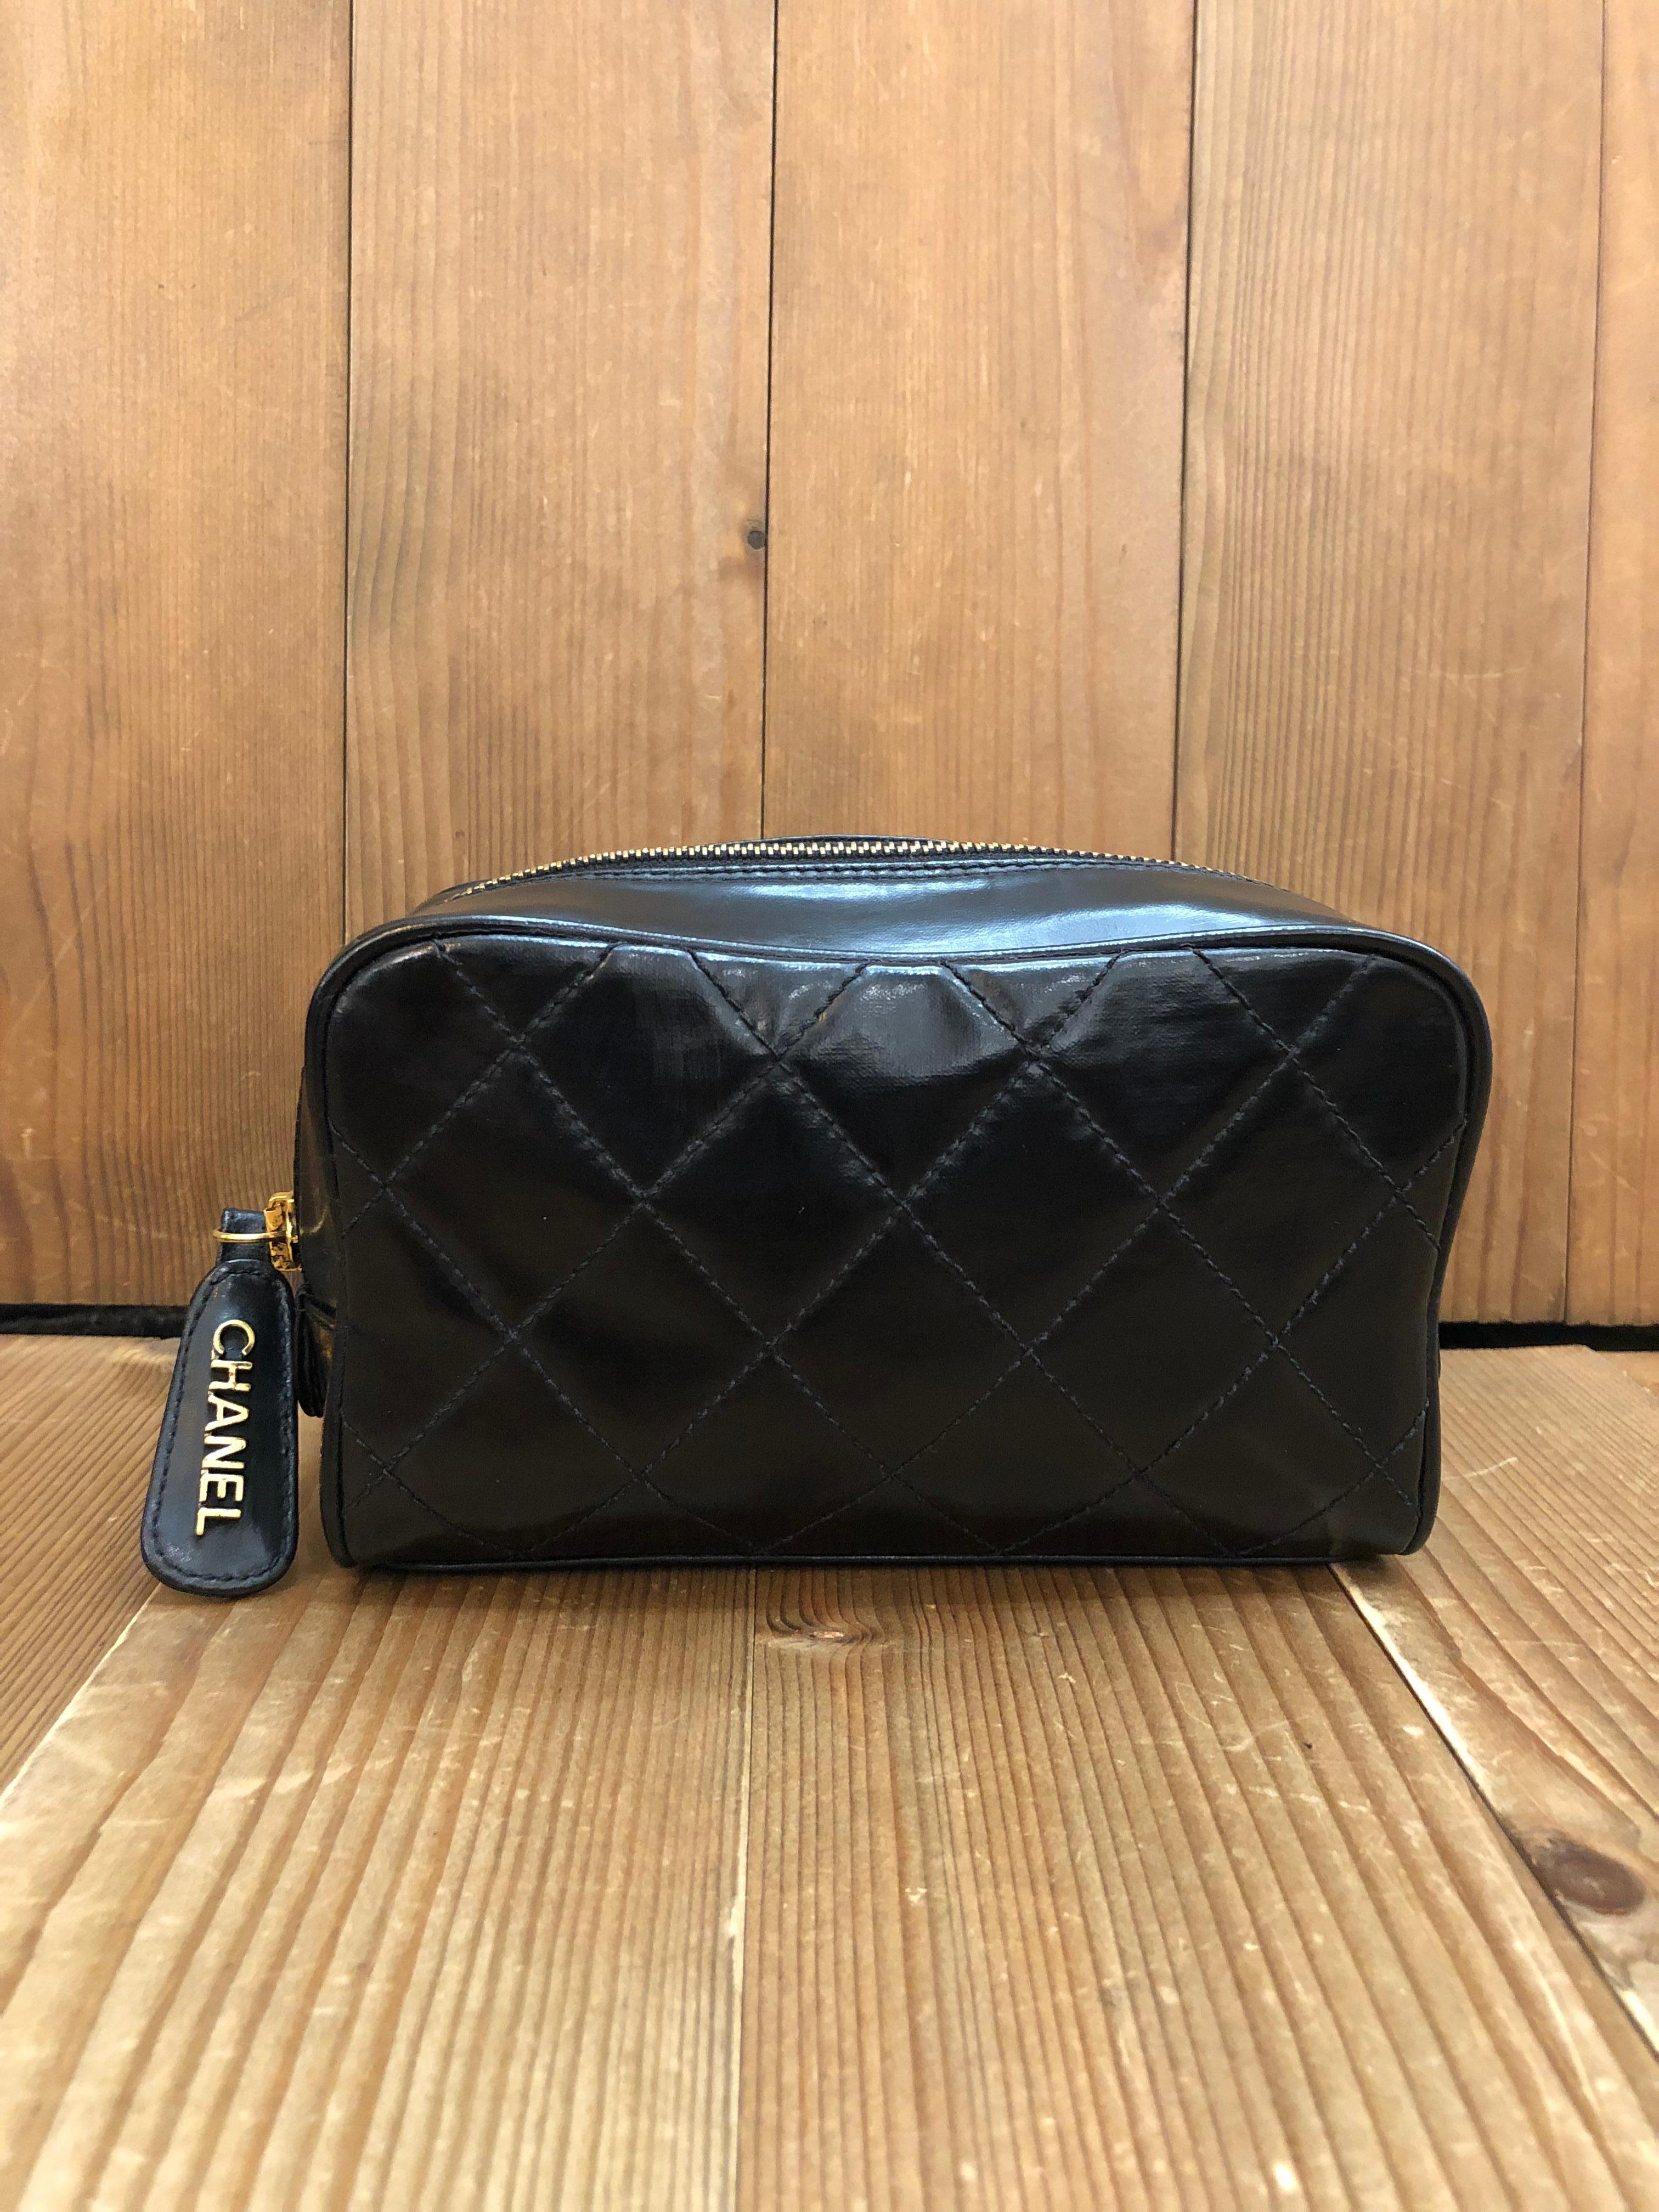 This vintage CHANEL vanity pouch clutch bag is crafted of black coated canvas in diamond quilted pattern. Top zipper closure opens to a black lambskin interior featuring two interior zippered pockets. Made in Italy 3xxxxxx series. Measures